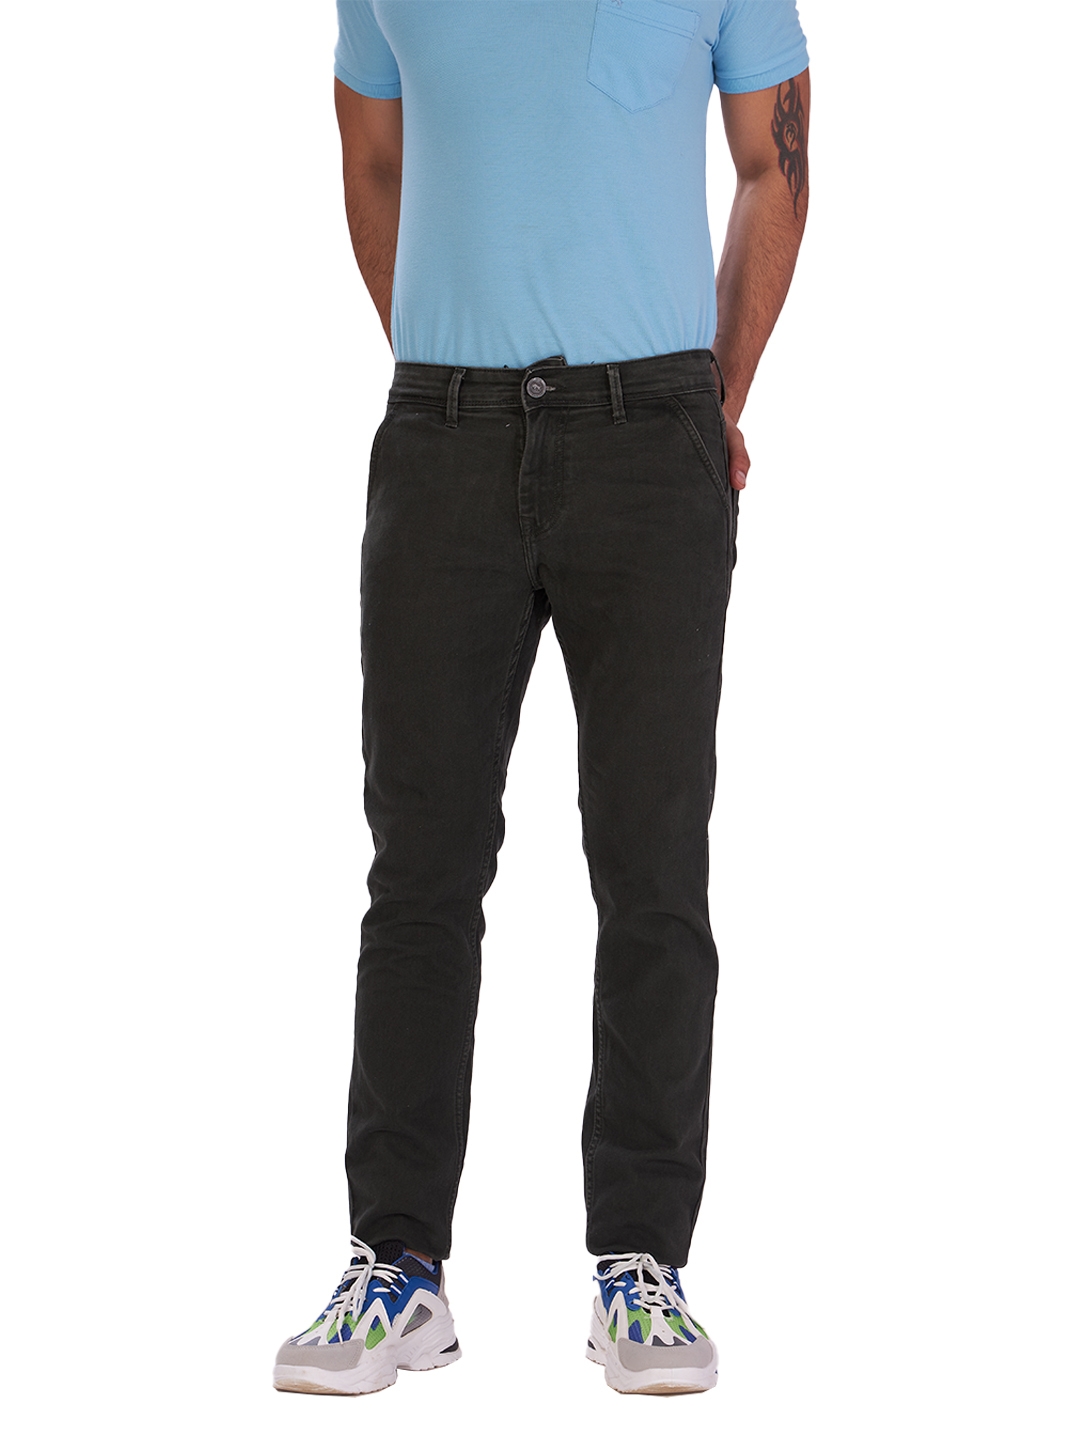 D'cot by Donear | D'cot by Donear Men's Green Cotton Jeans